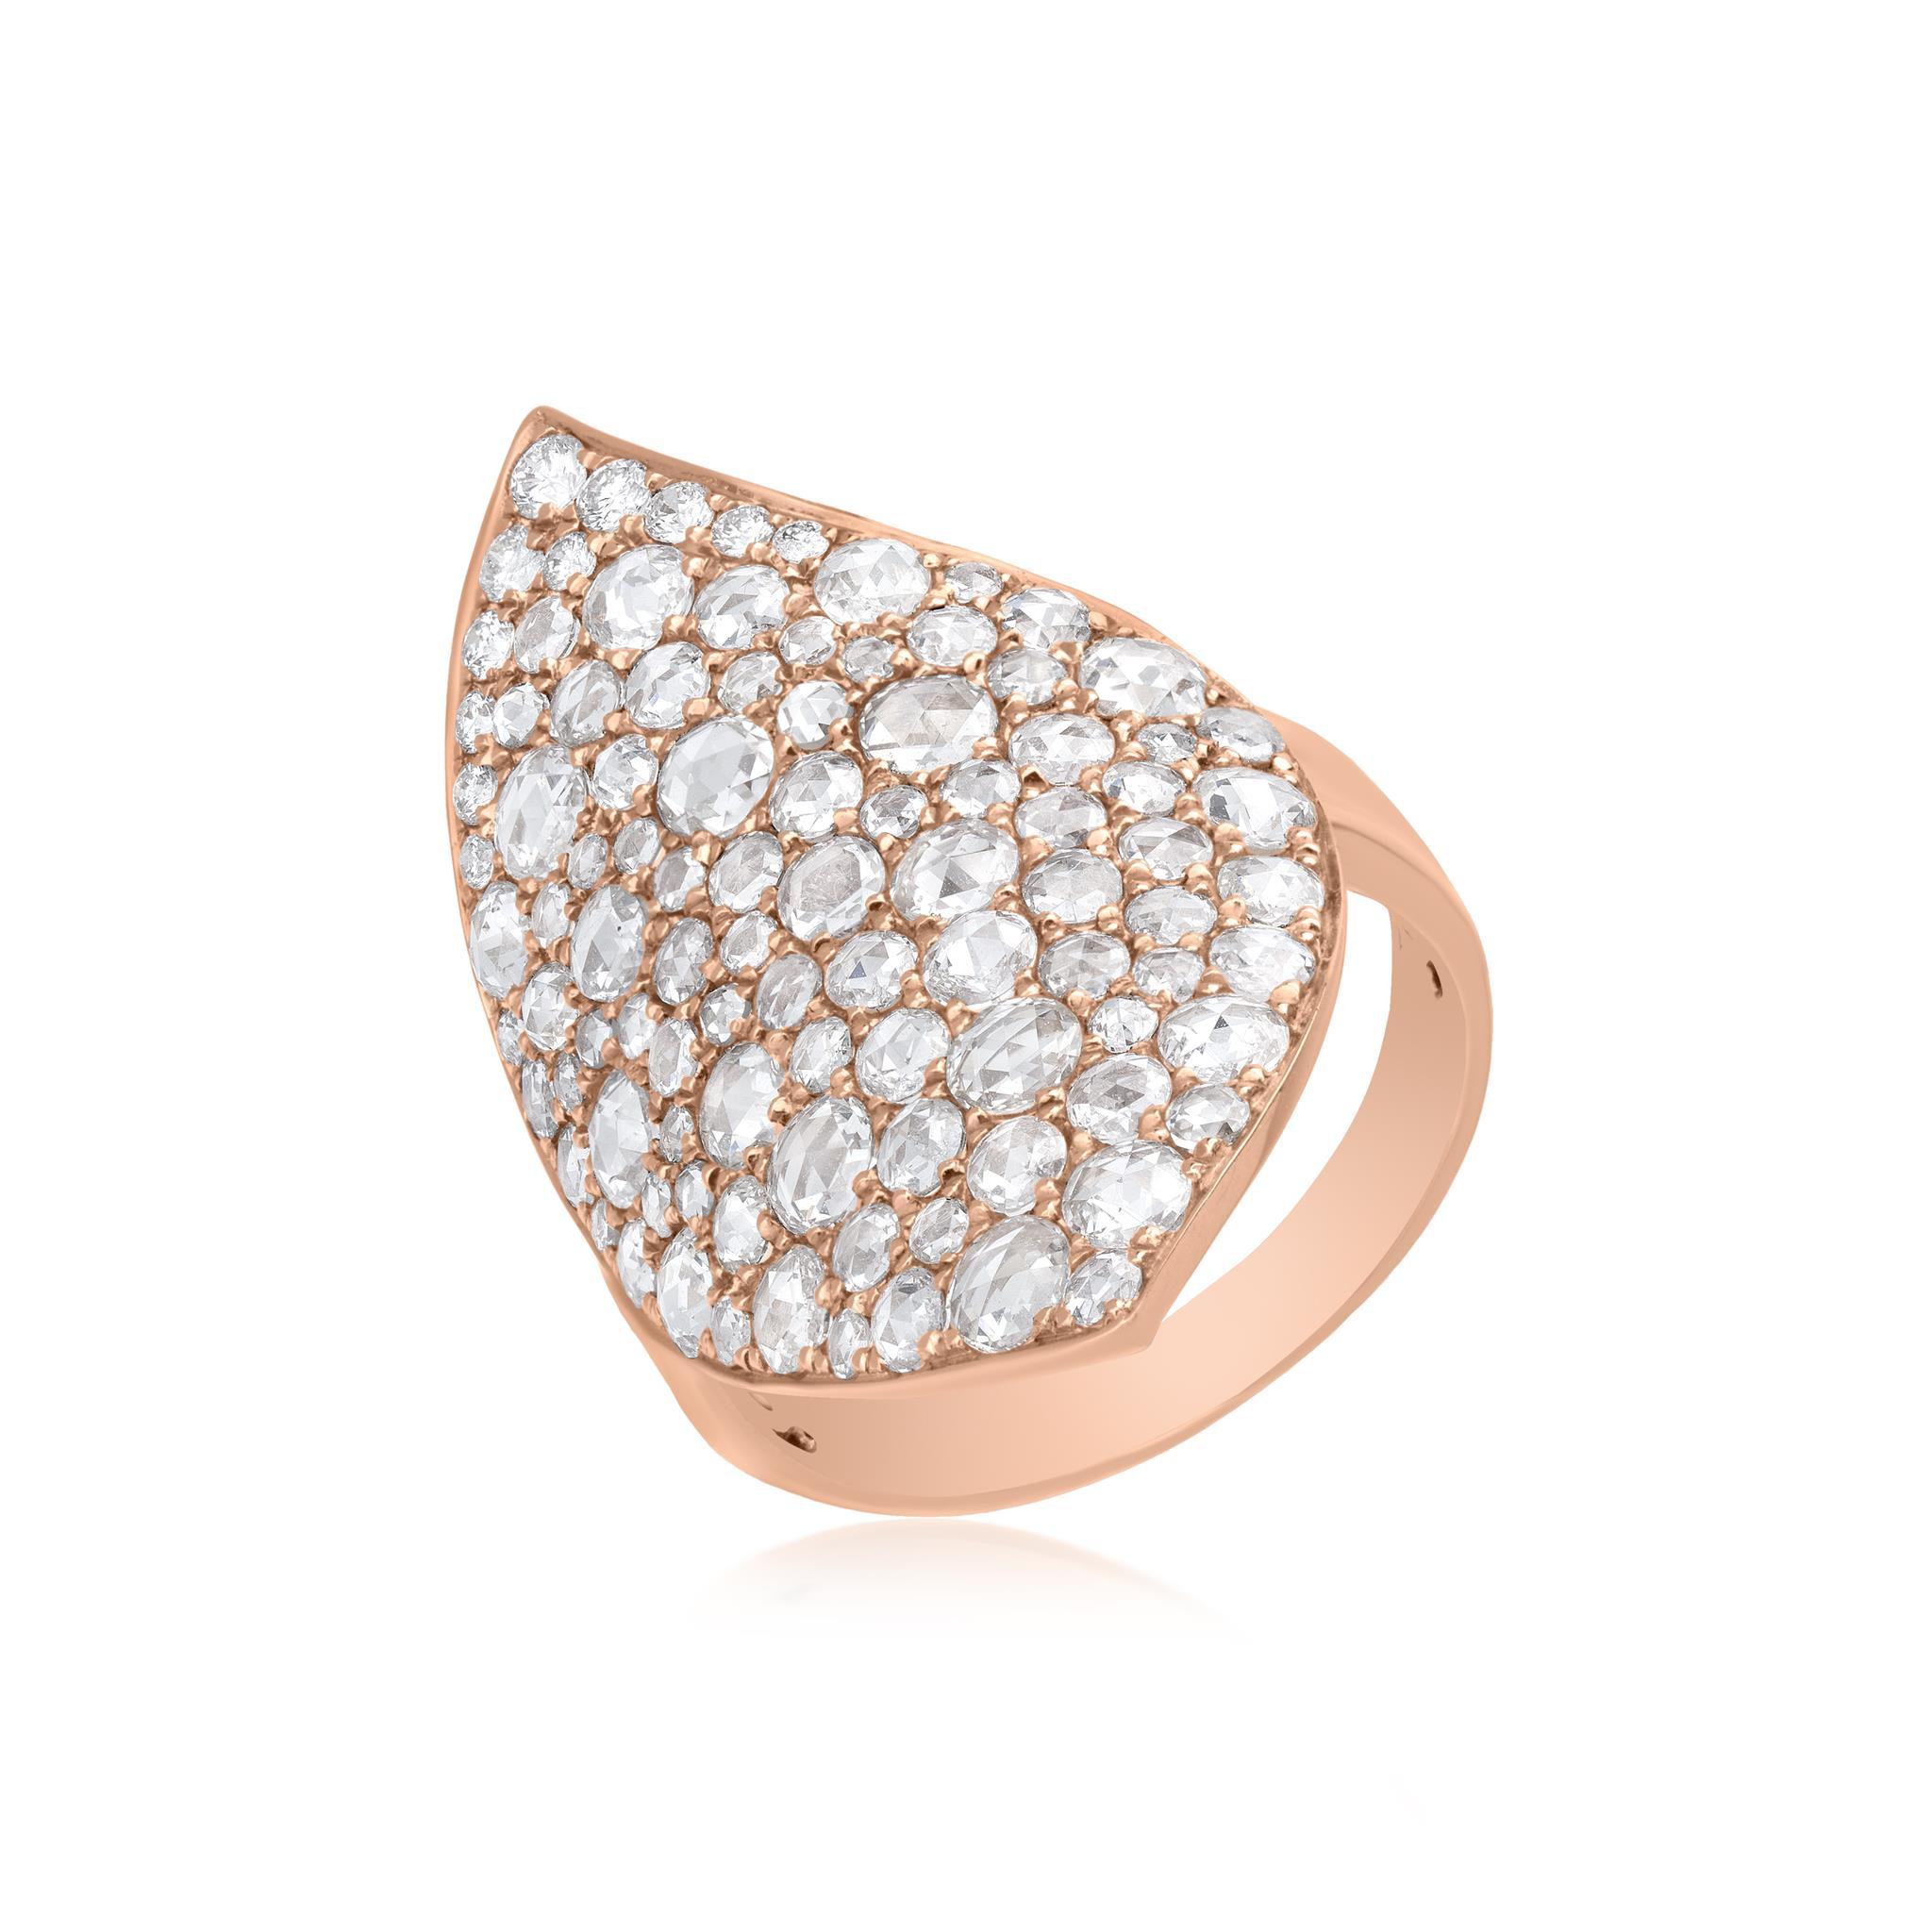 Make a stunning statement with the Luxle 2.19 Cttw. Rose-Cut Round Diamond Leaf Cluster Ring in 18K Rose Gold. This ring is a true masterpiece, showcasing the beauty of diamonds in a unique and eye-catching design.

The ring features a leaf shaped